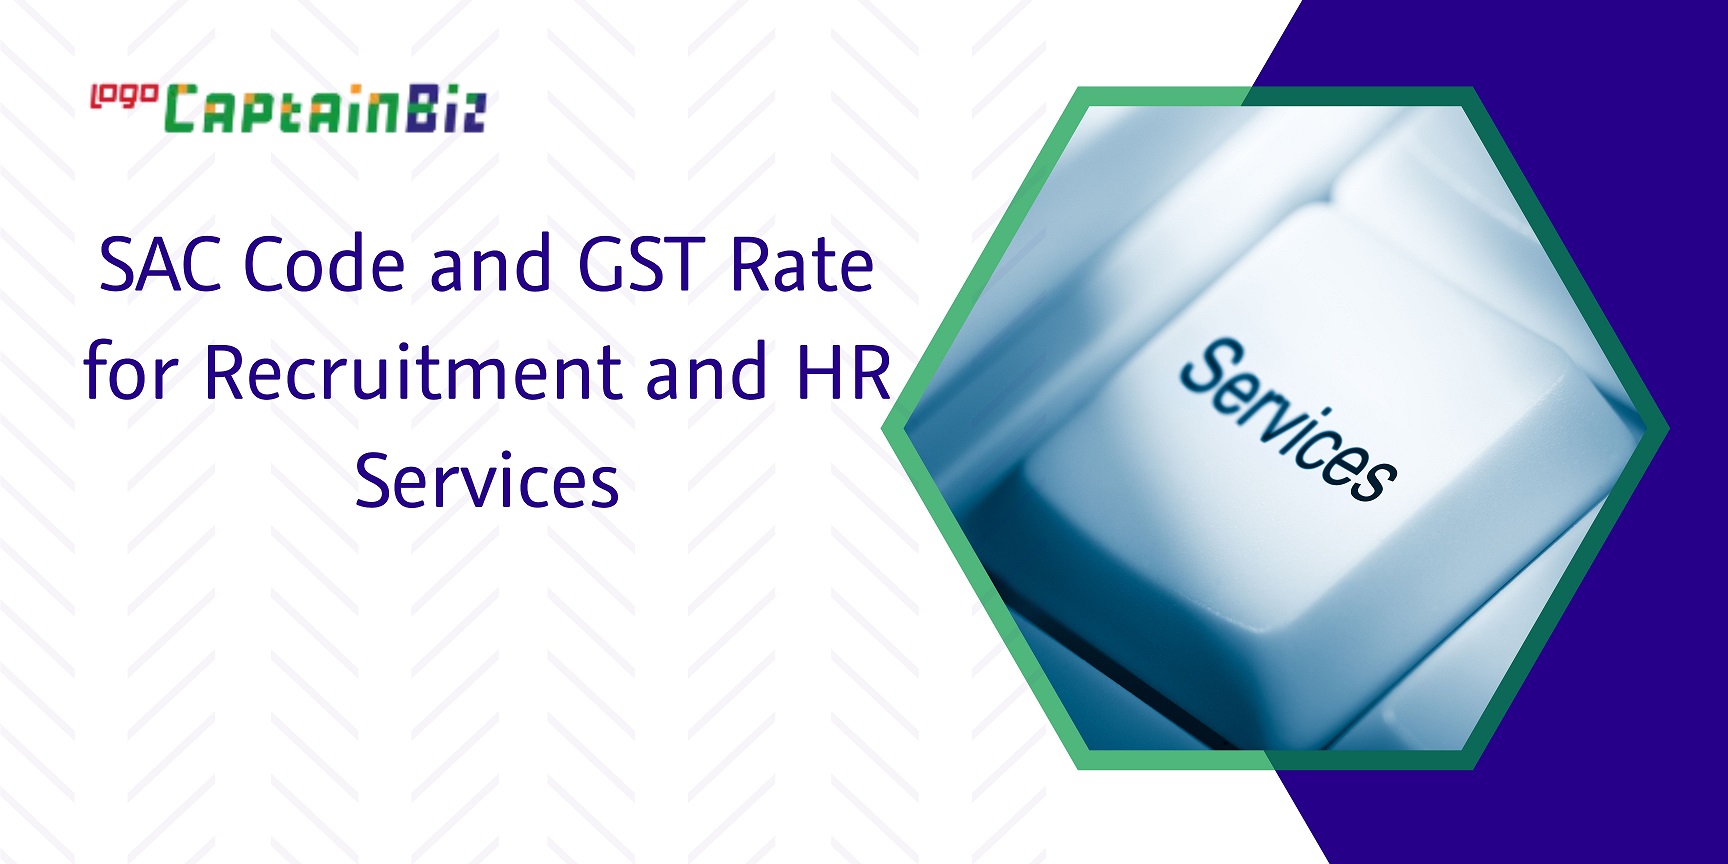 captainbiz sac code and gst rate for recruitment and hr services